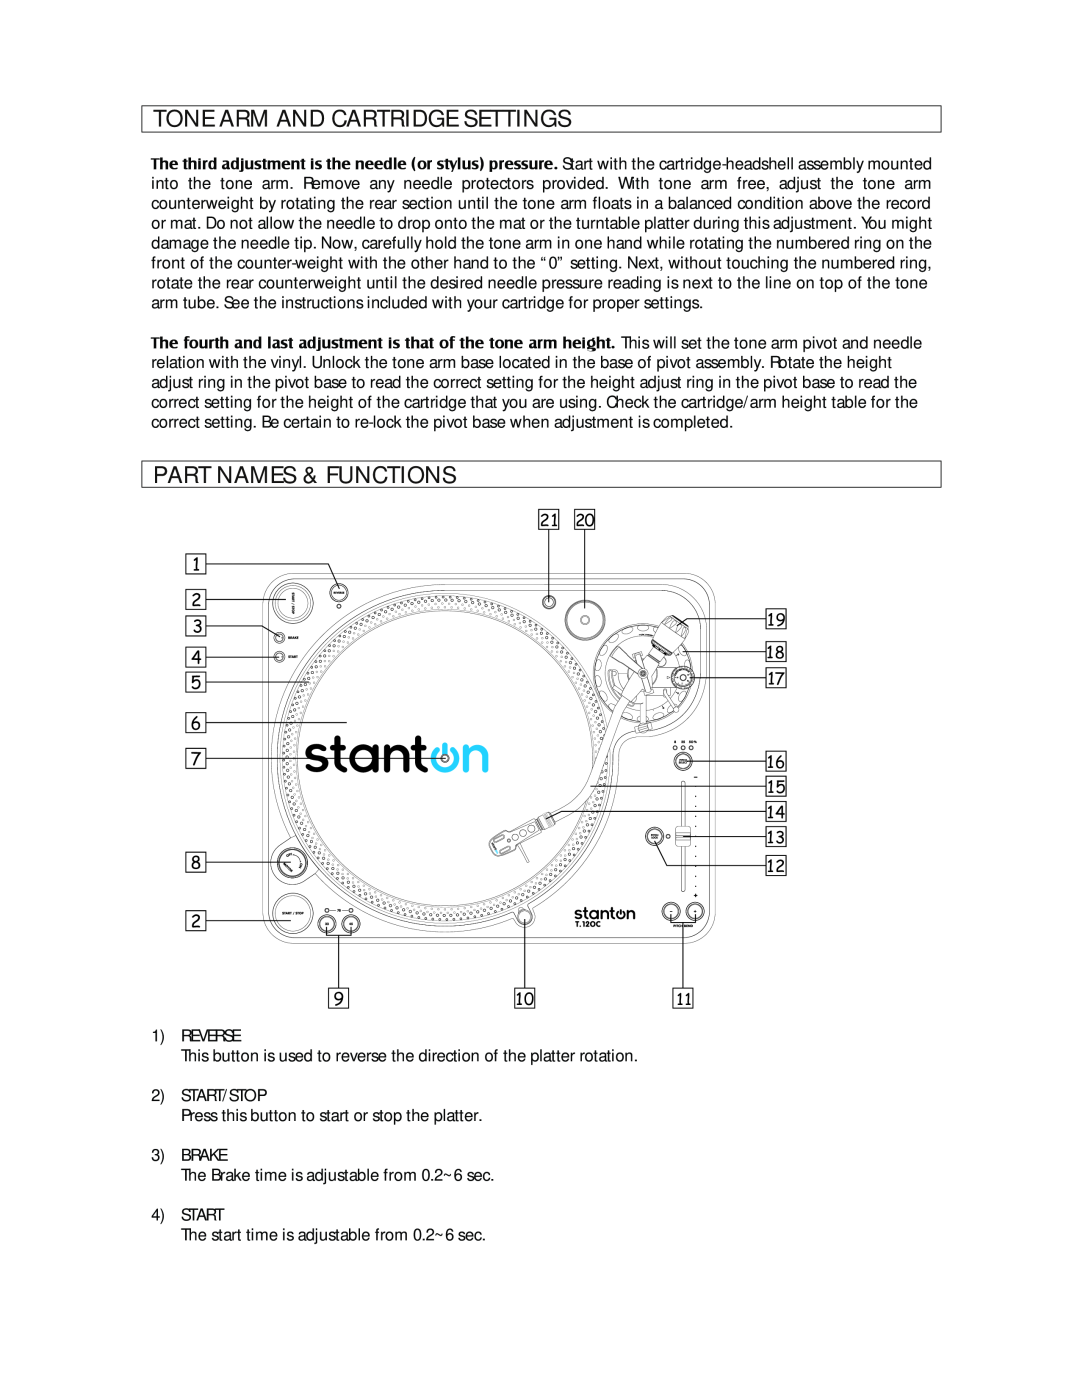 Stanton T.12OC manual Part Names & Functions, Tone Arm And Cartridge Settings, 2120, 19 18 17 16 15 14 